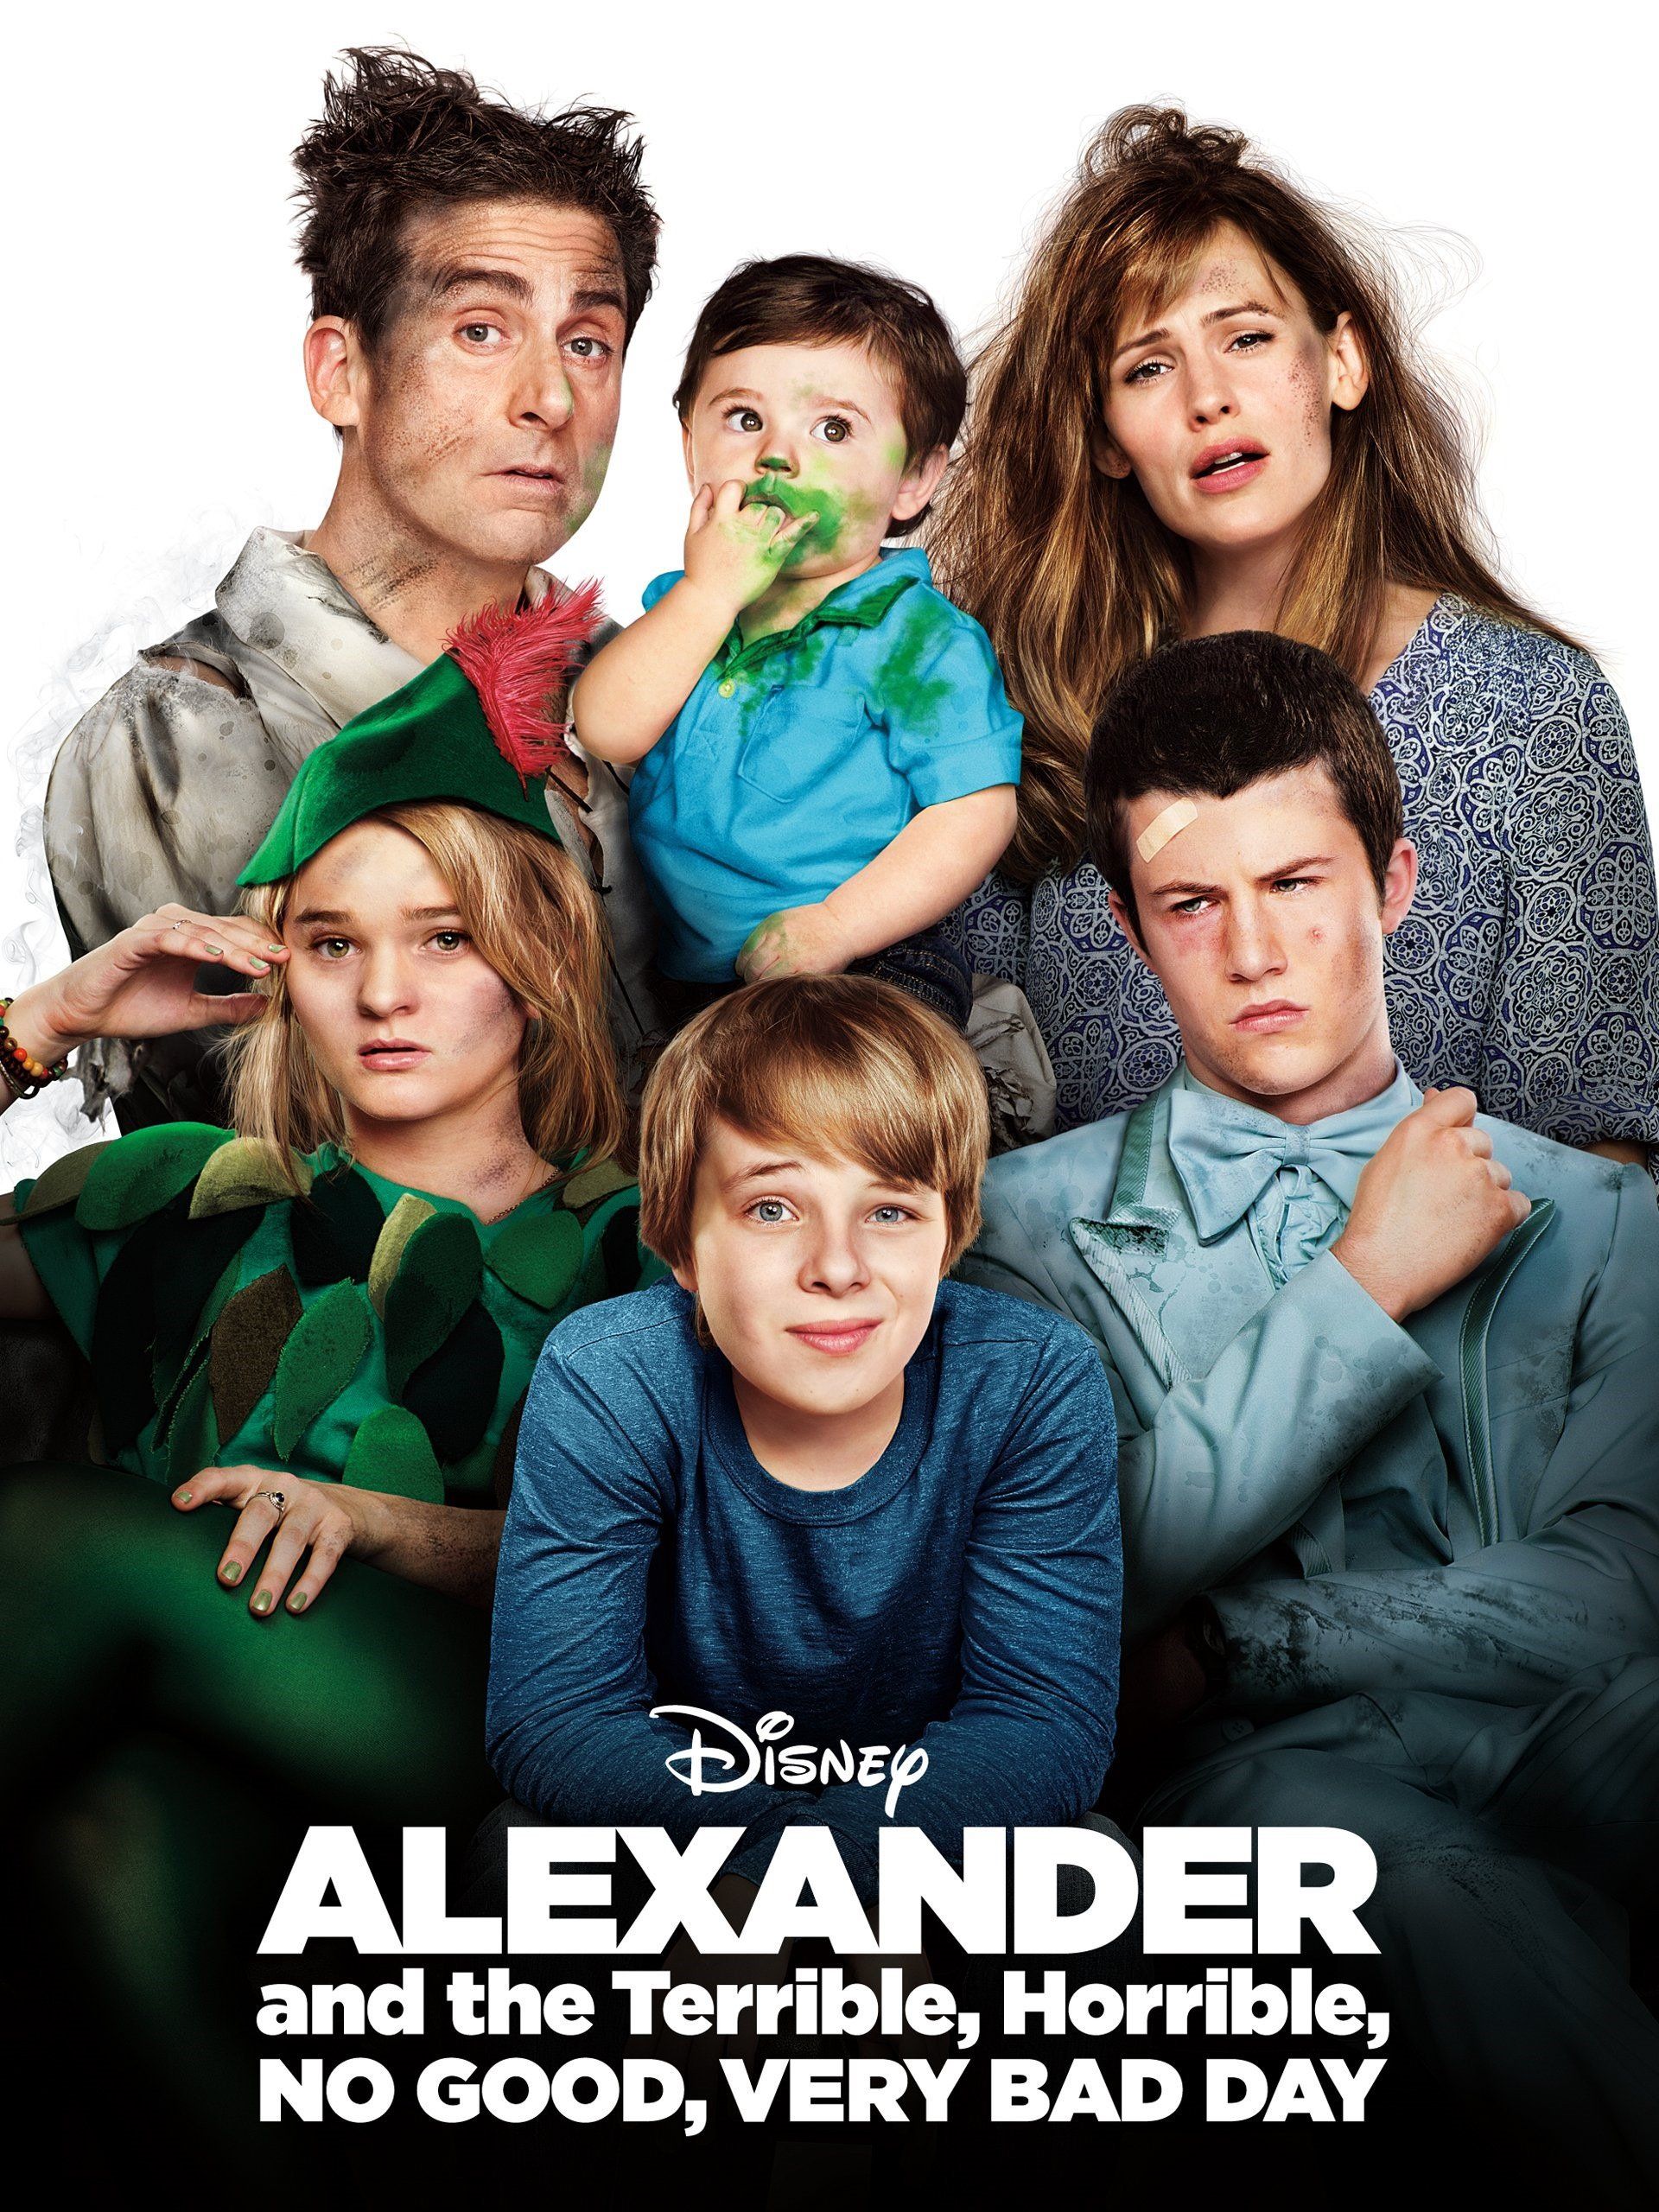 Alexander and the Terrible, Horrible, No Good, Very Bad Day HD Digital Movie Code